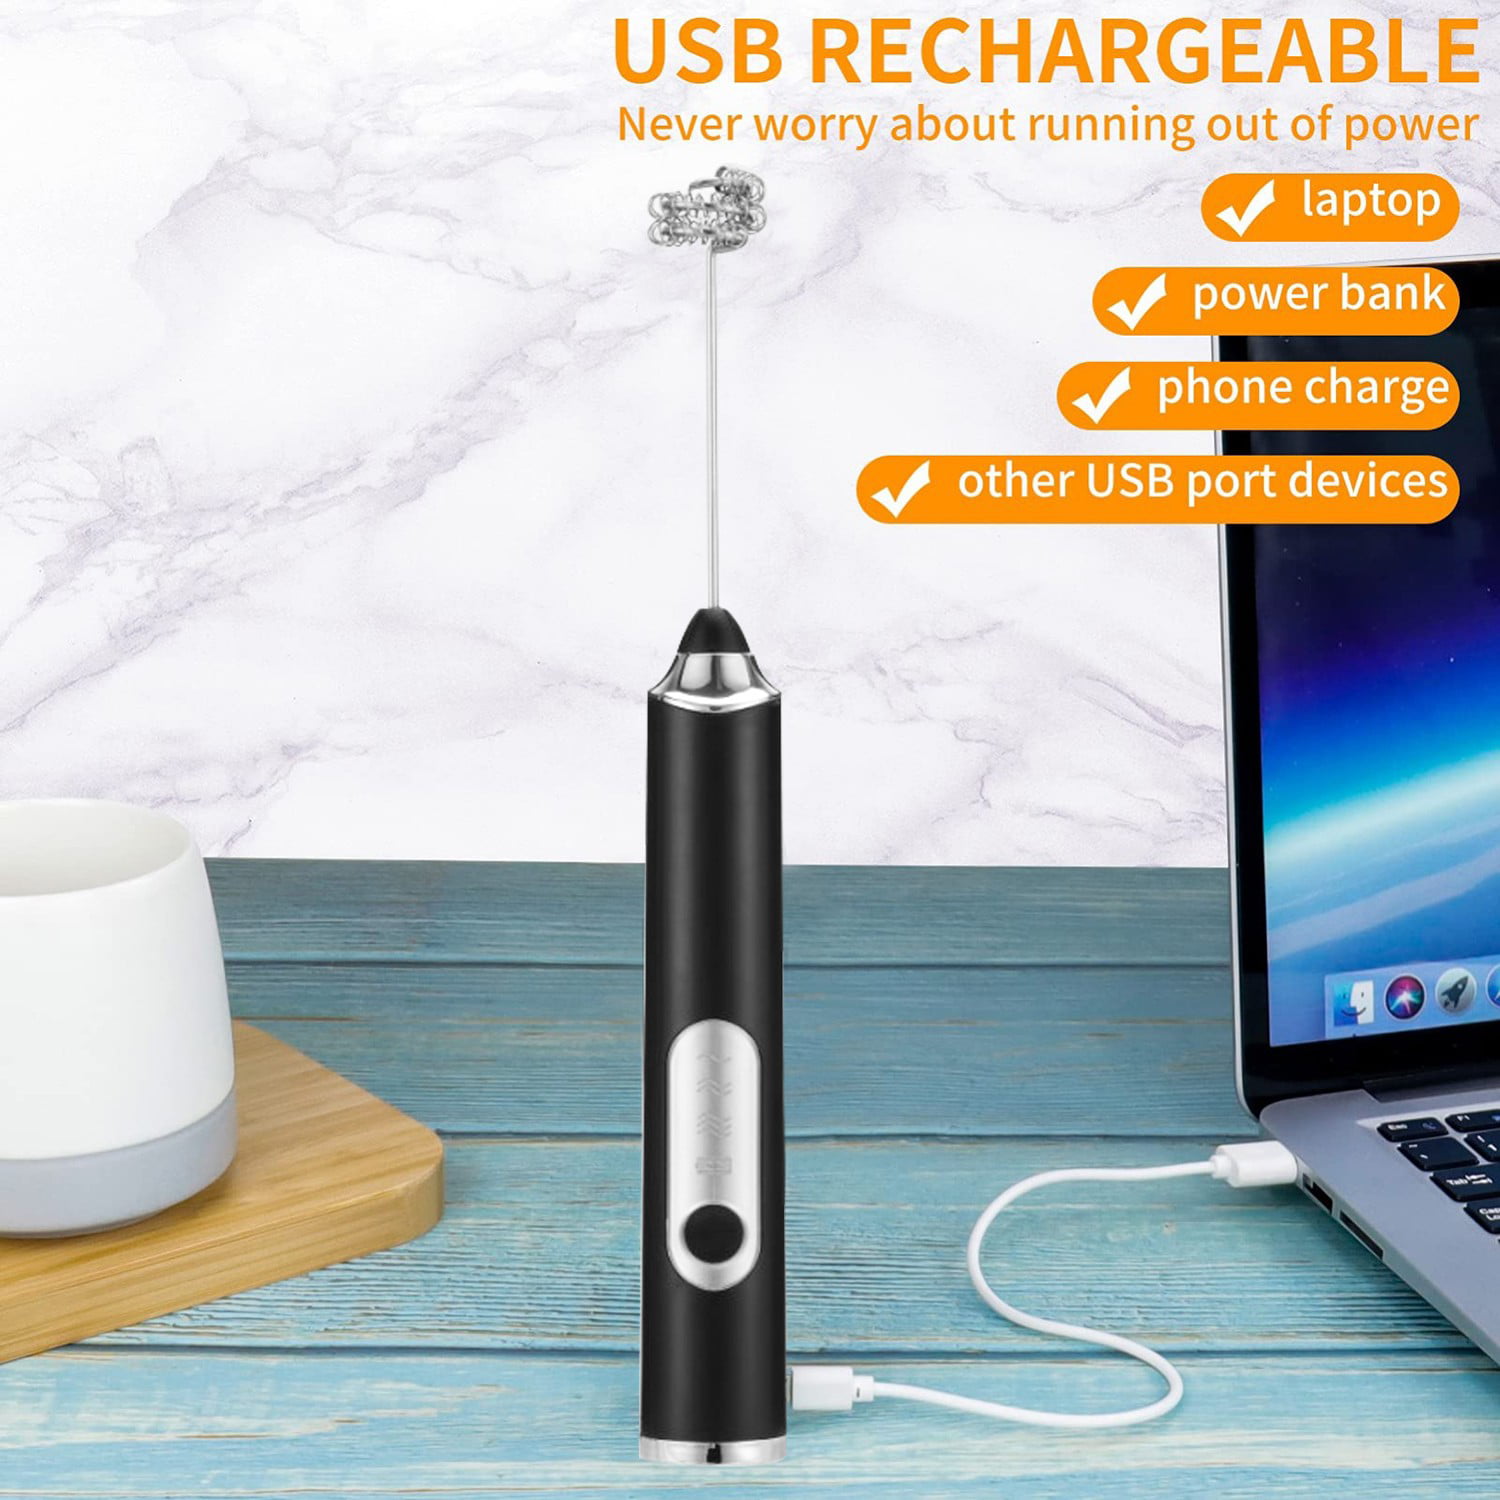 Humidifiers Rechargeable Eggbeater Handheld Stainless Milk Frother Foamer Blender Coffee Mixer with Charging Cable